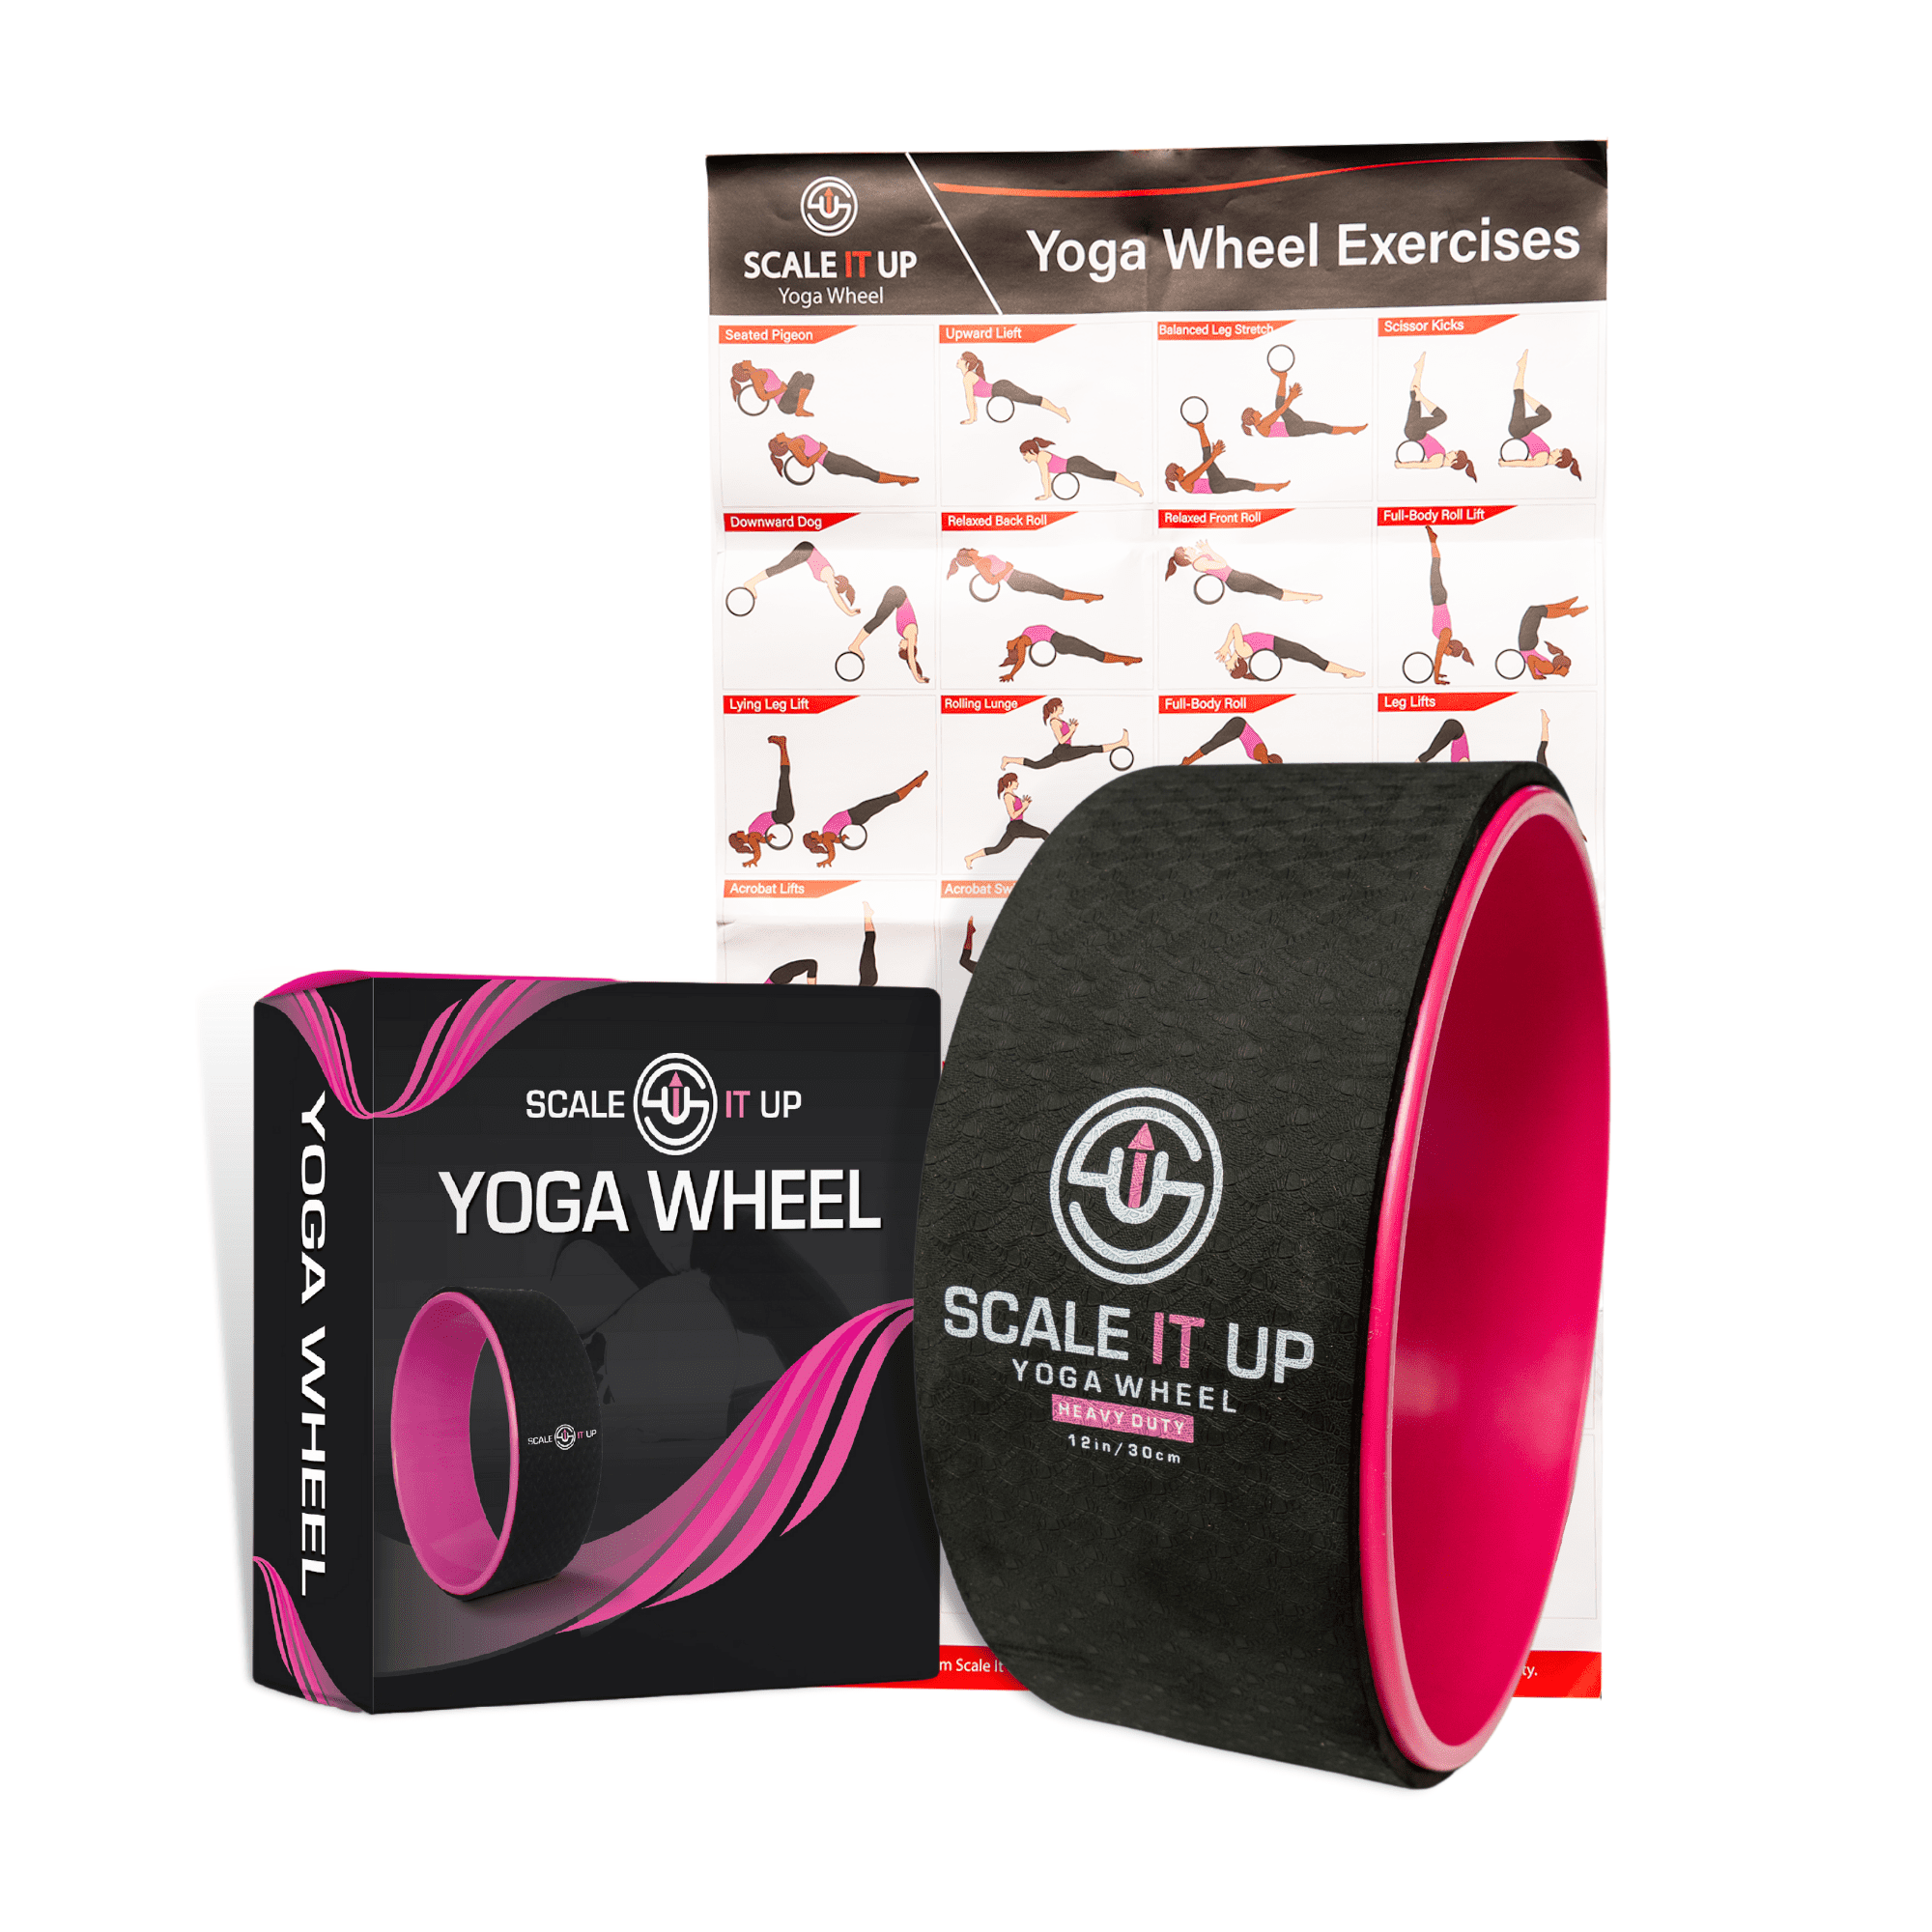 ZHOVEE 3 YOGA BACK WHEELS FOR BACK PAIN RELIEF STRETCHING & IMPROVING BACKBEND 